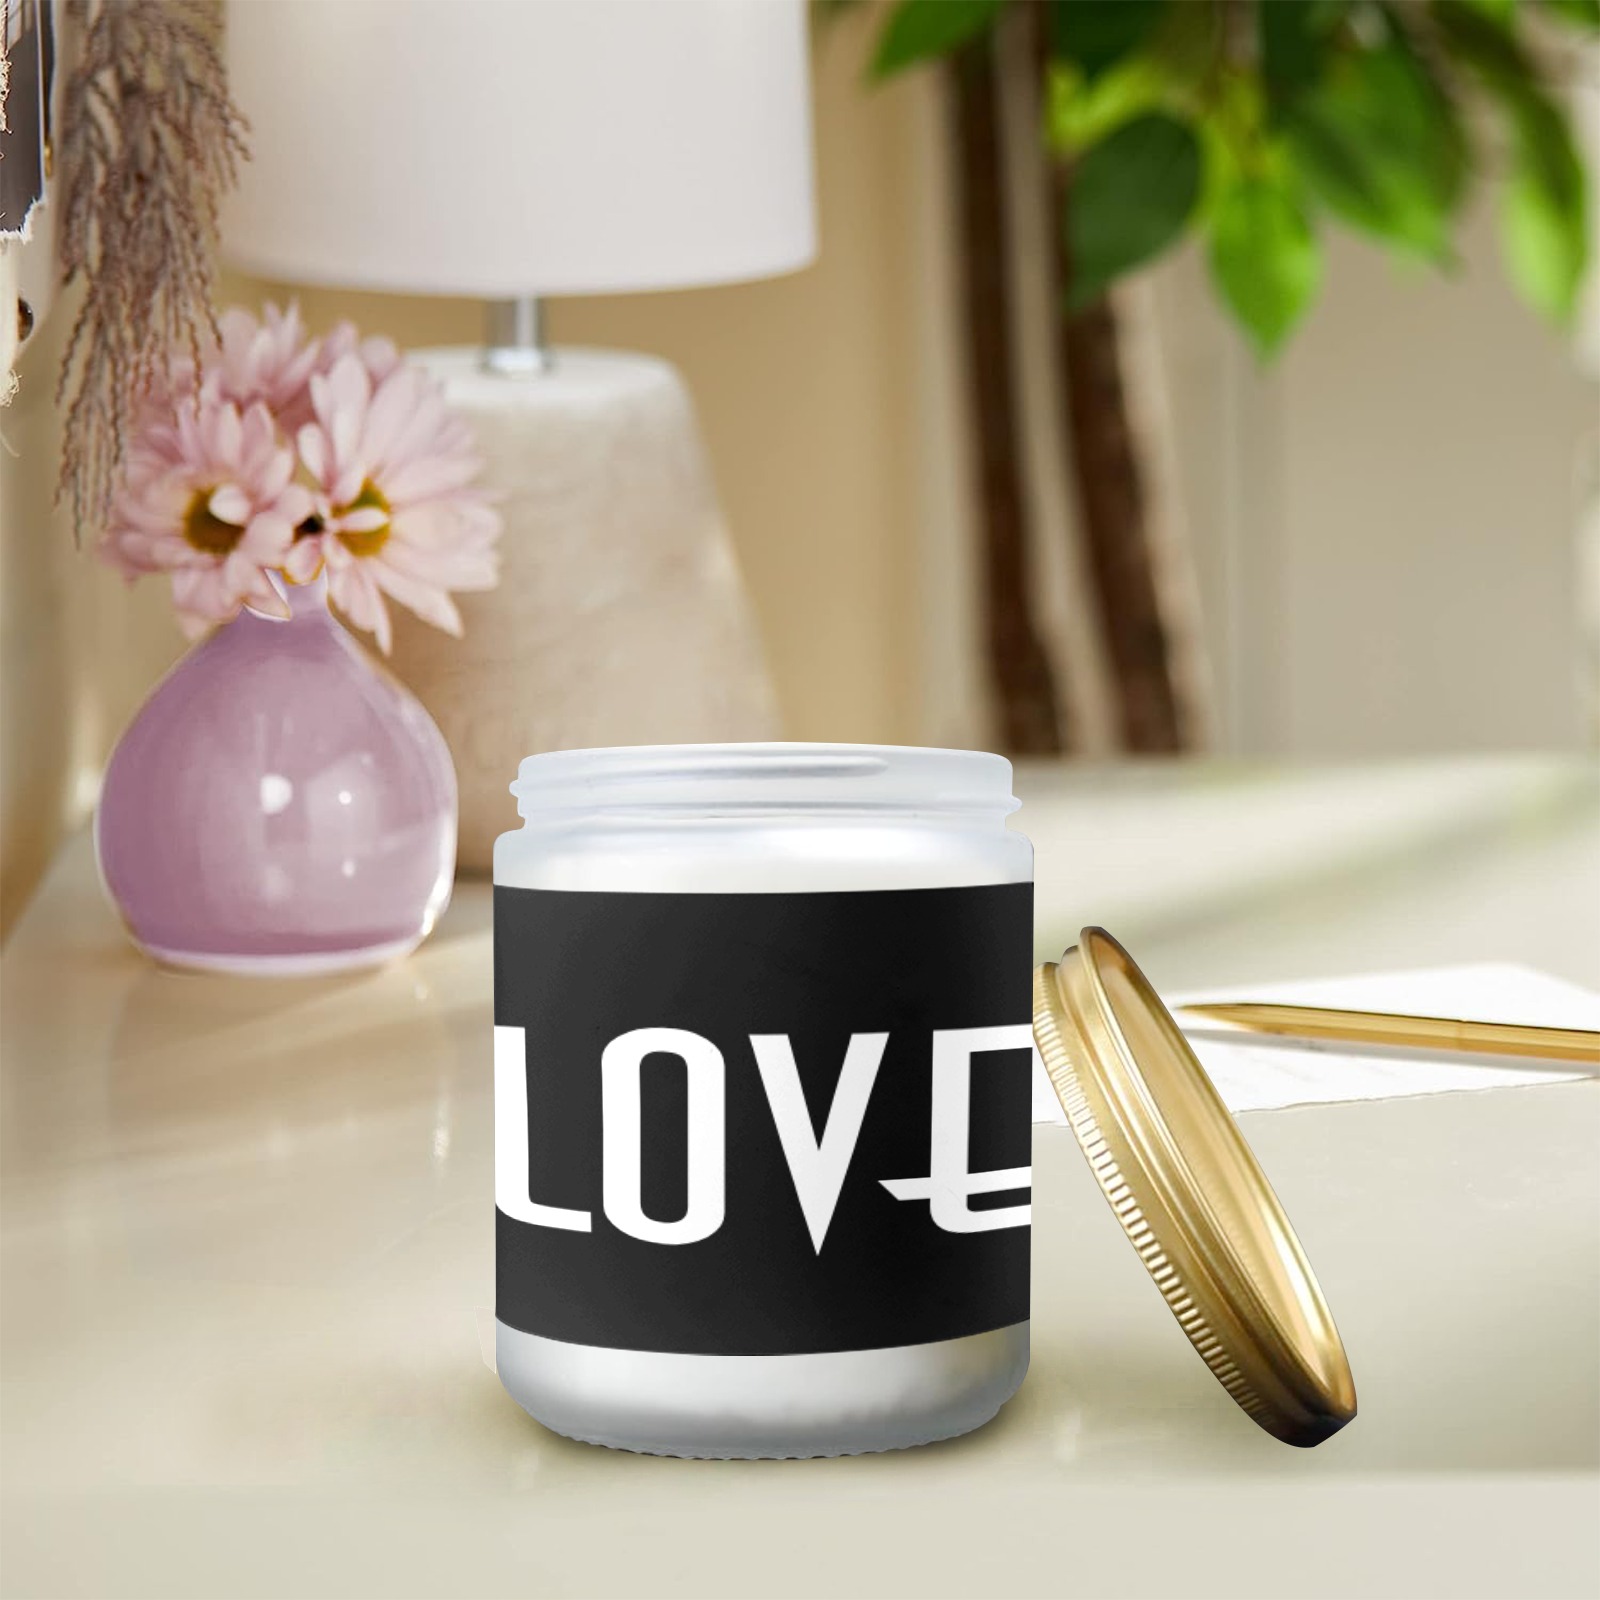 LOVE Frosted Glass Candle Cup - Large Size